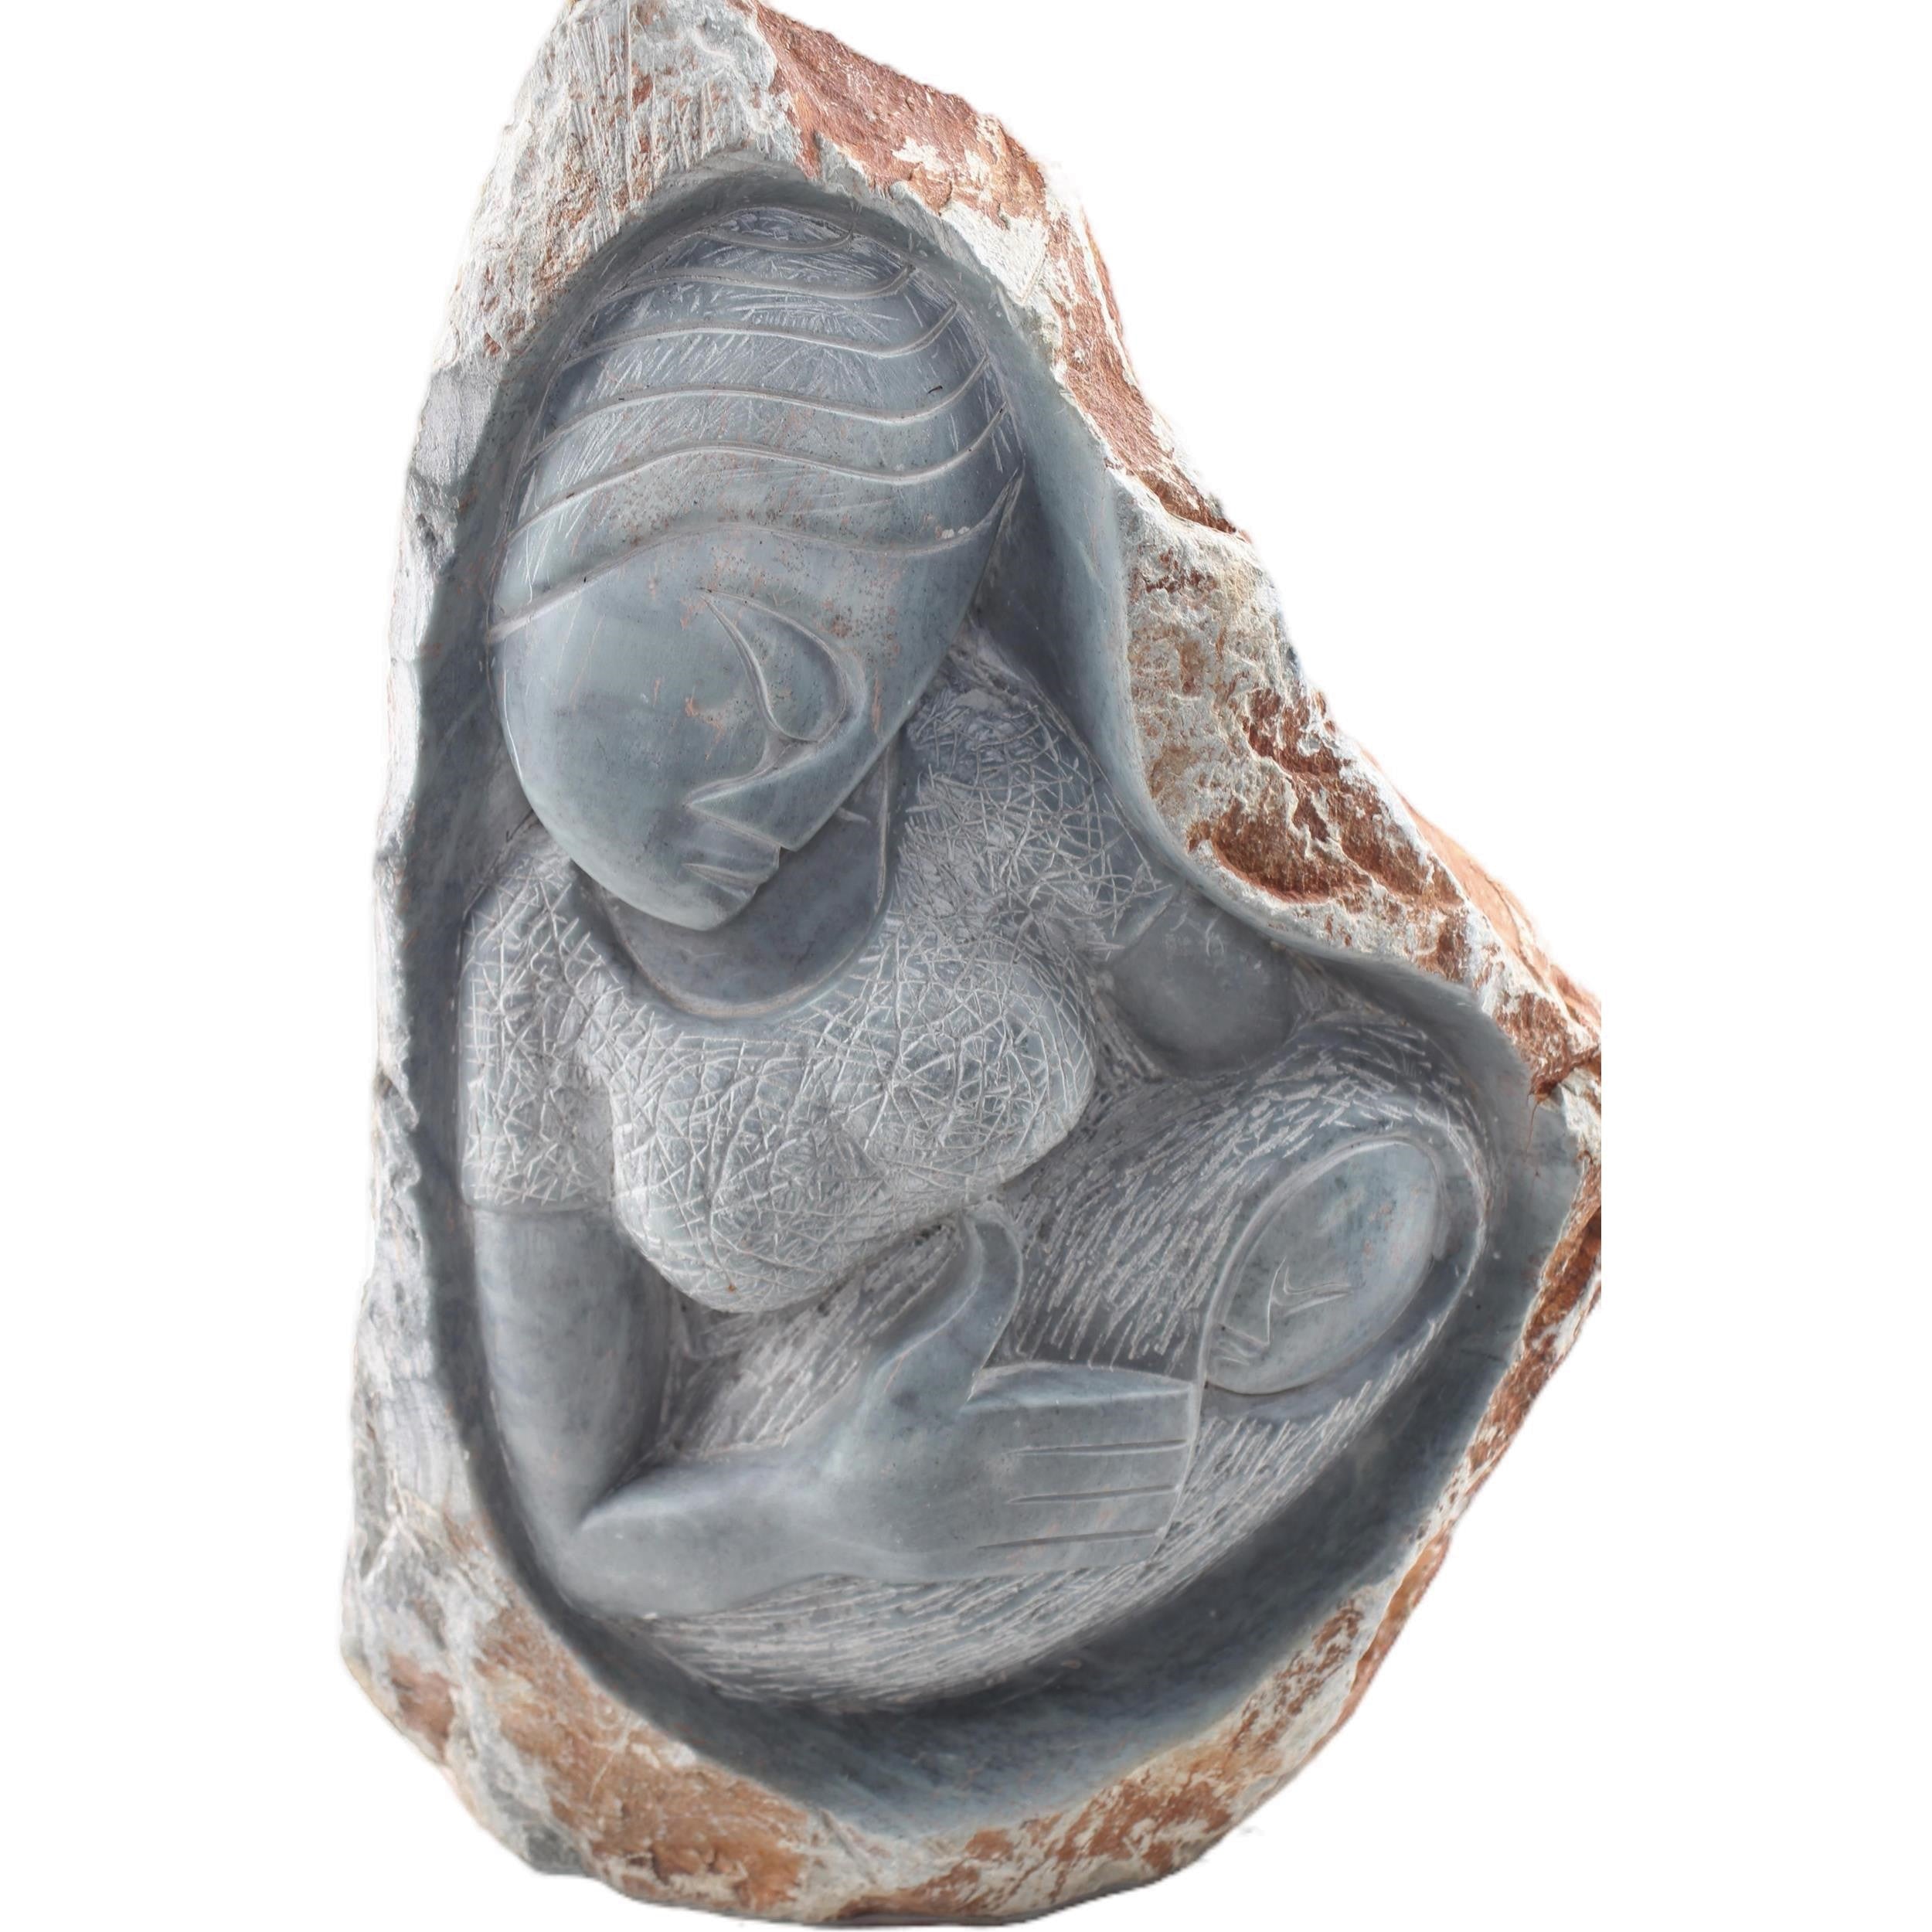 Shona Tribe Serpentine Stone Mother and Child ~16.9" Tall - Mother and Child